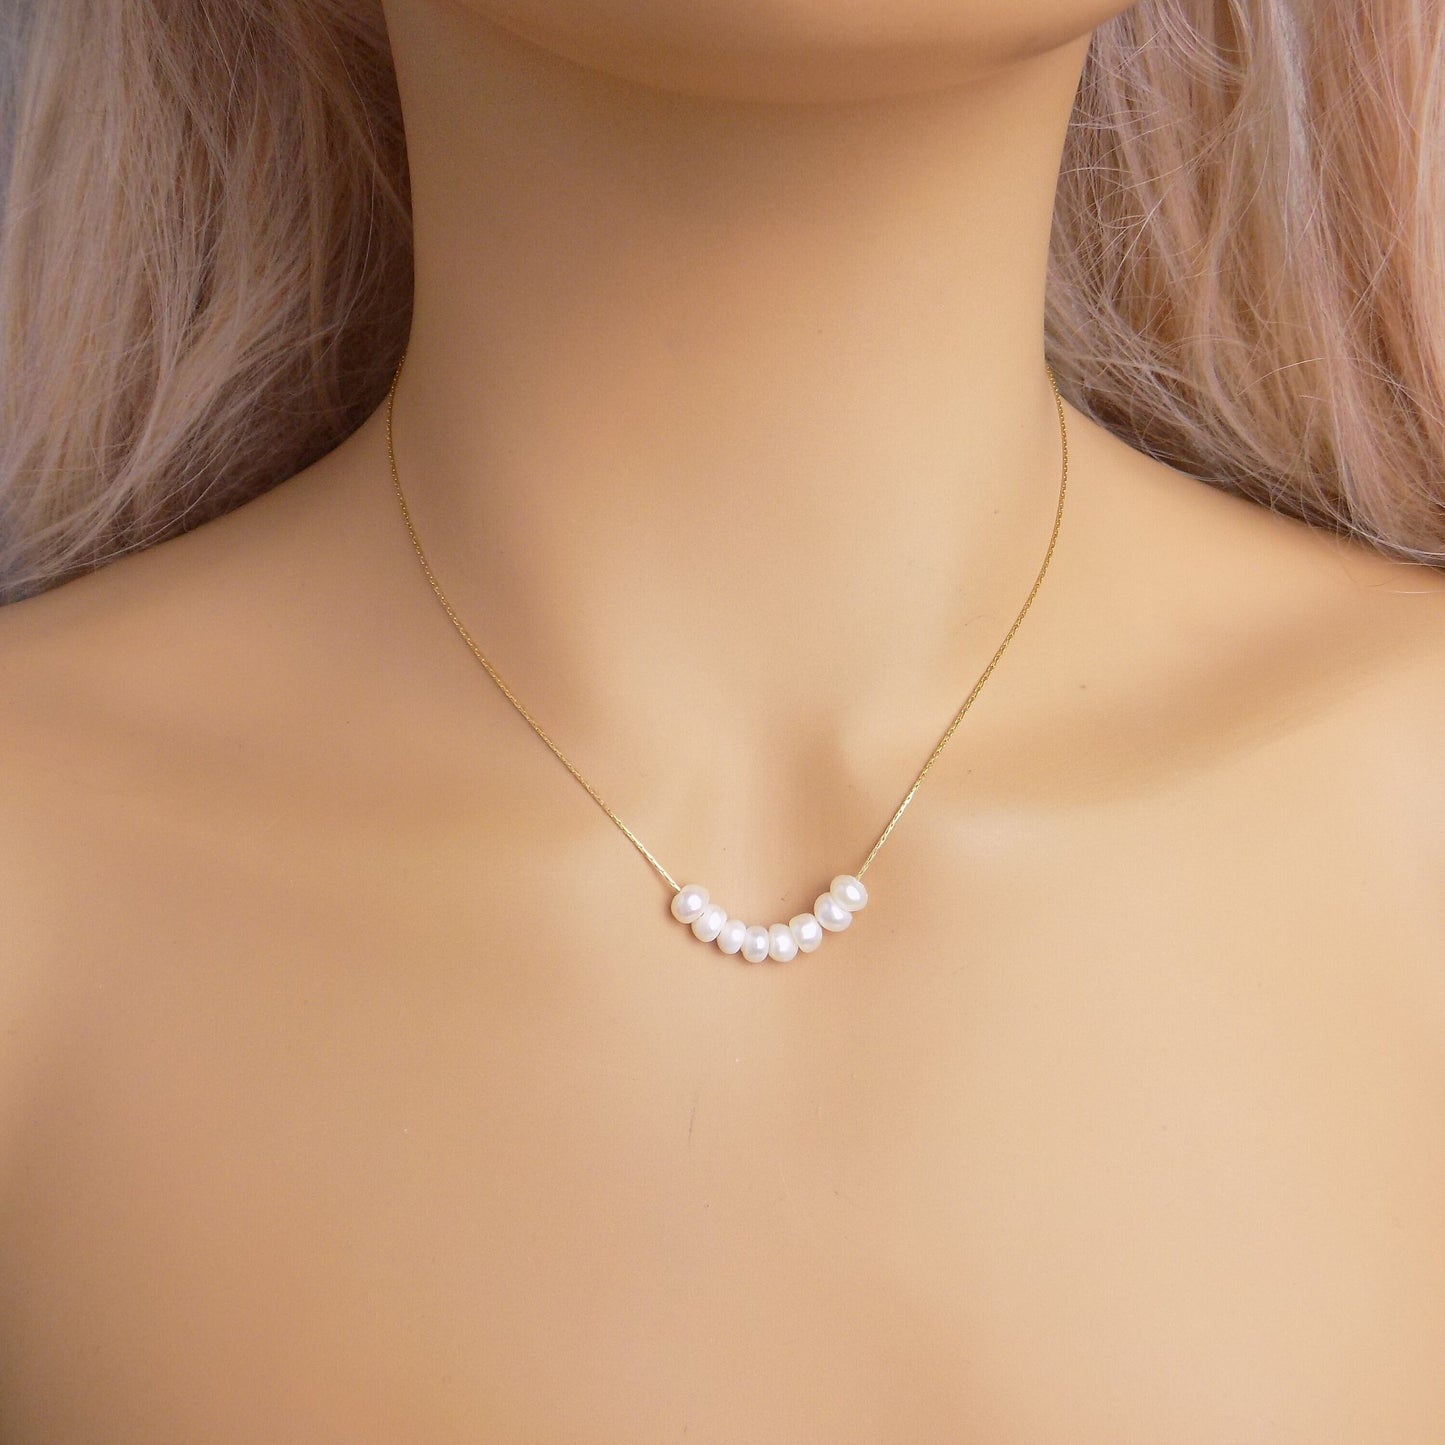 Dainty Freshwater Pearl Necklace 18K Gold Stainless Steel, Christmas Gift For Mom, Gift For Girlfriend, M7-114